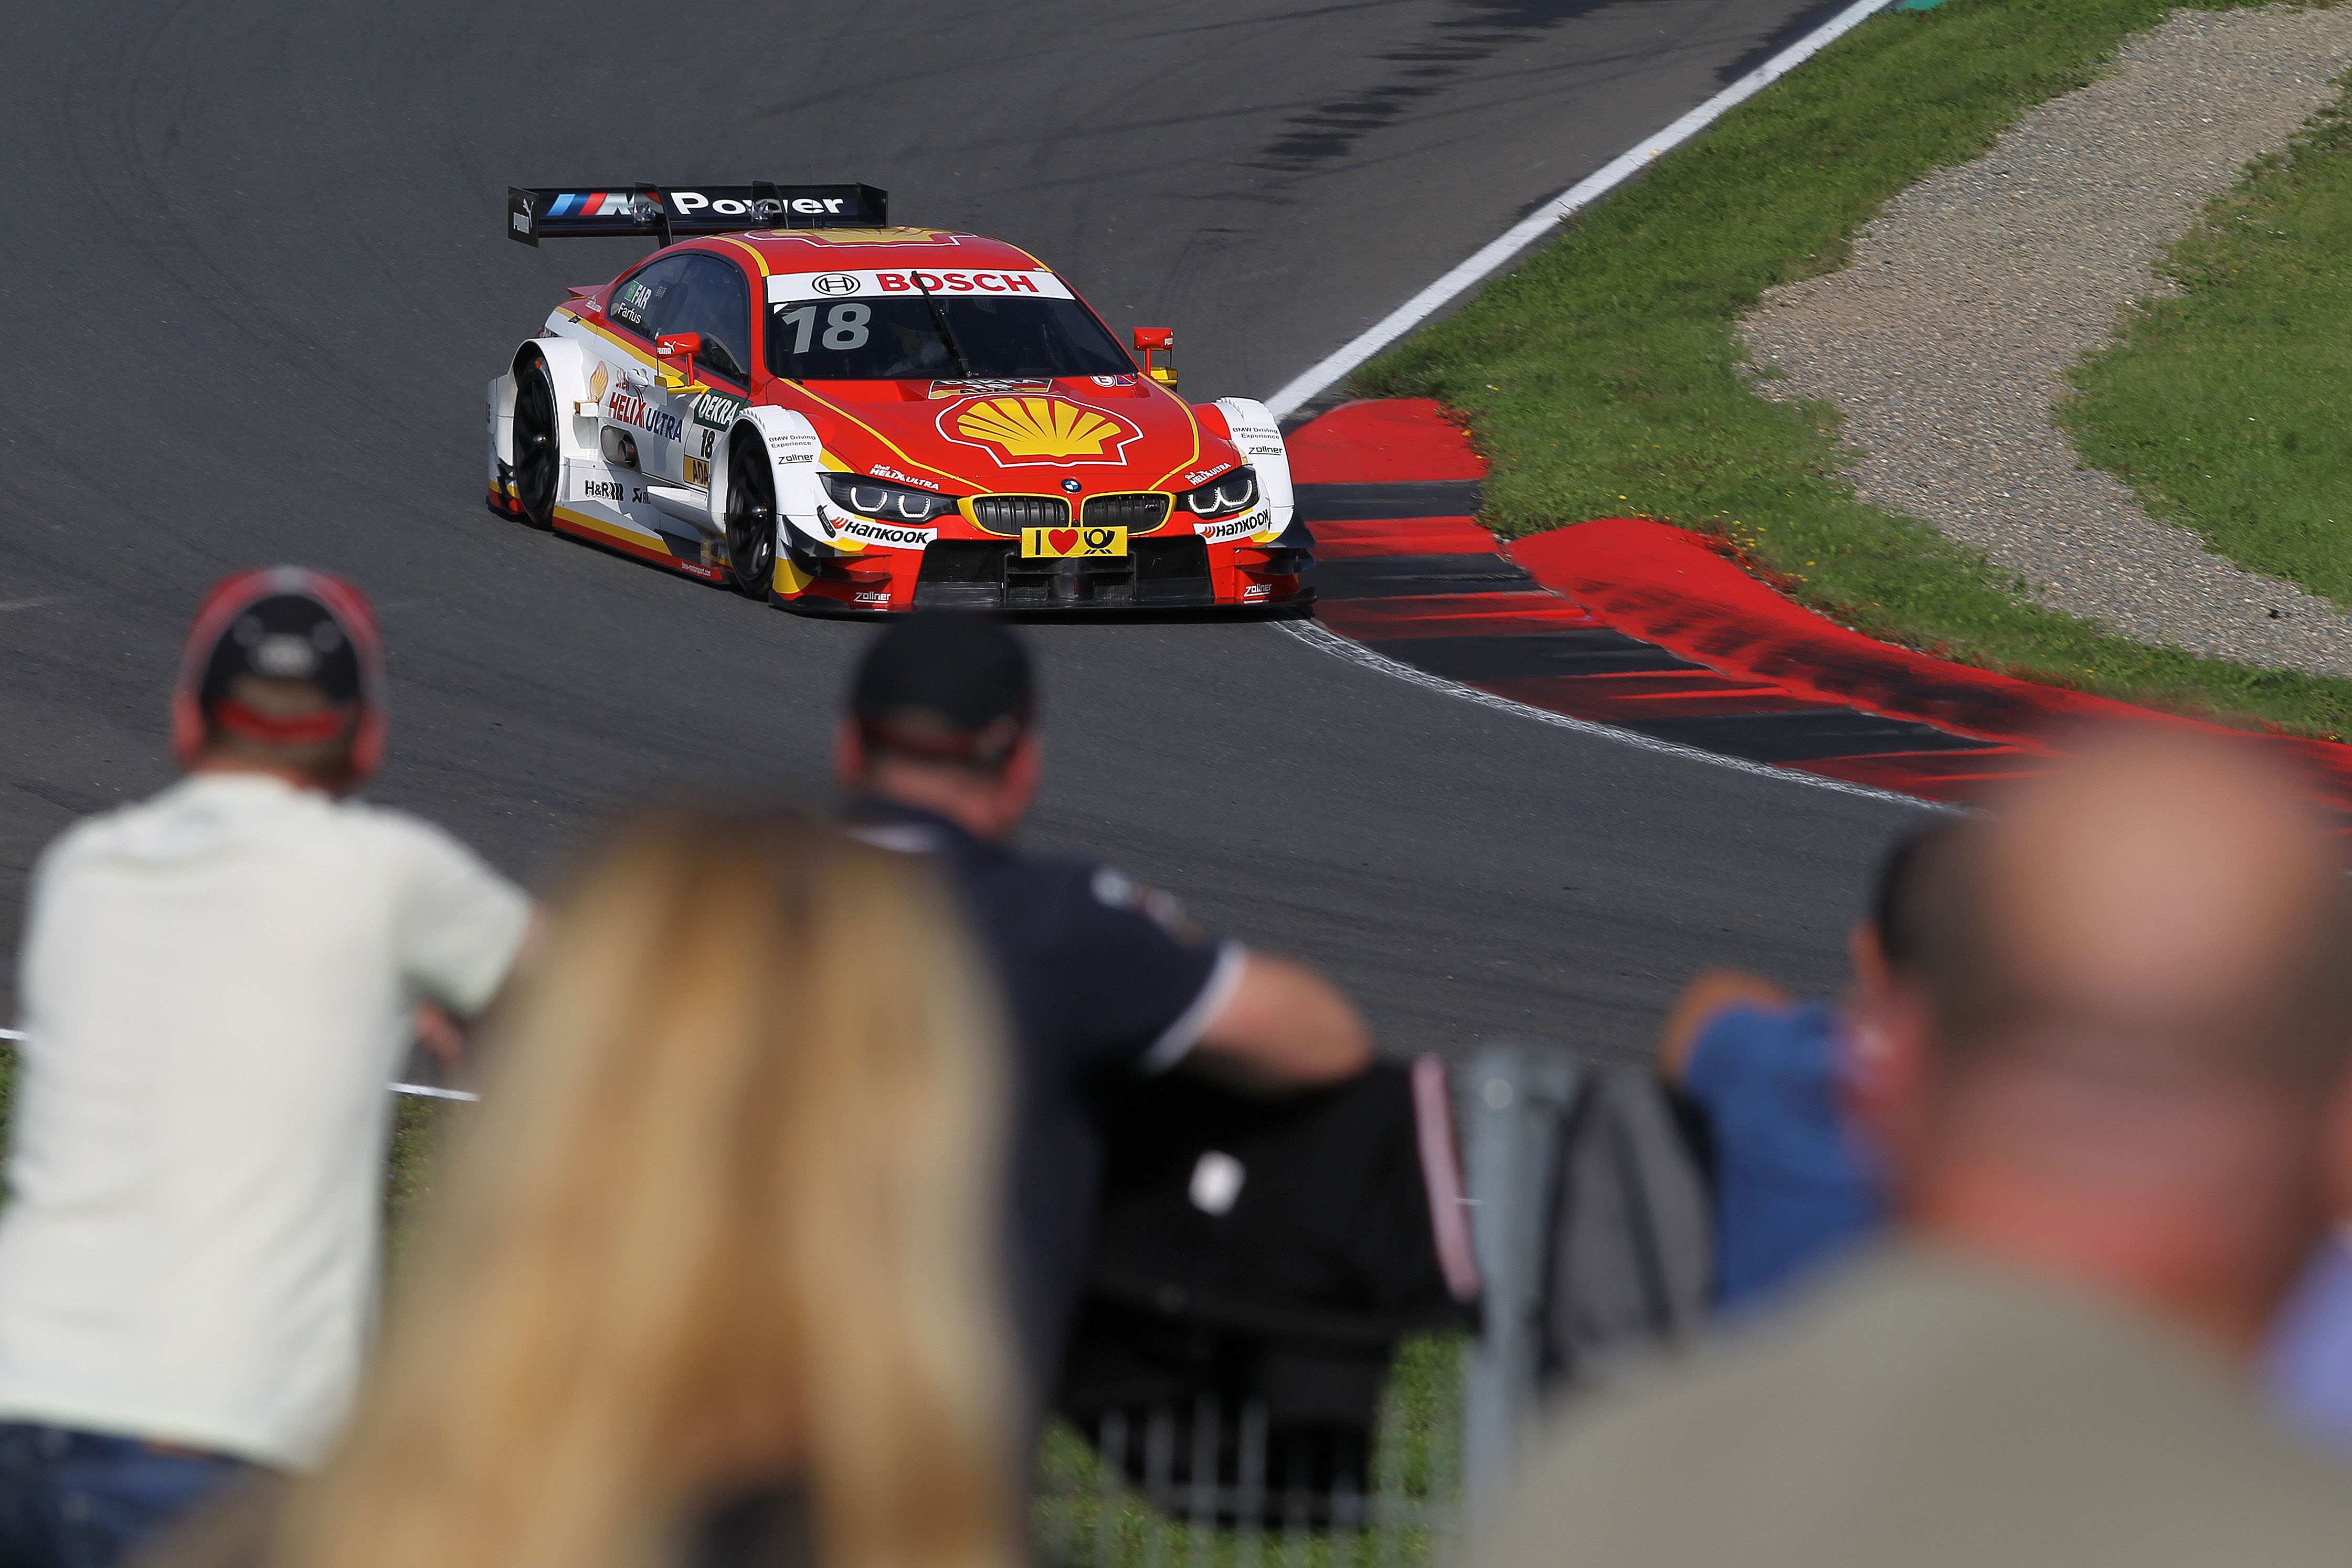 Oschersleben (DE) 13th September 2015. BMW Motorsport, Augusto Farfus (BR Shell BMW M4 DTM). This image is copyright free for editorial use © BMW AG (09/2015).